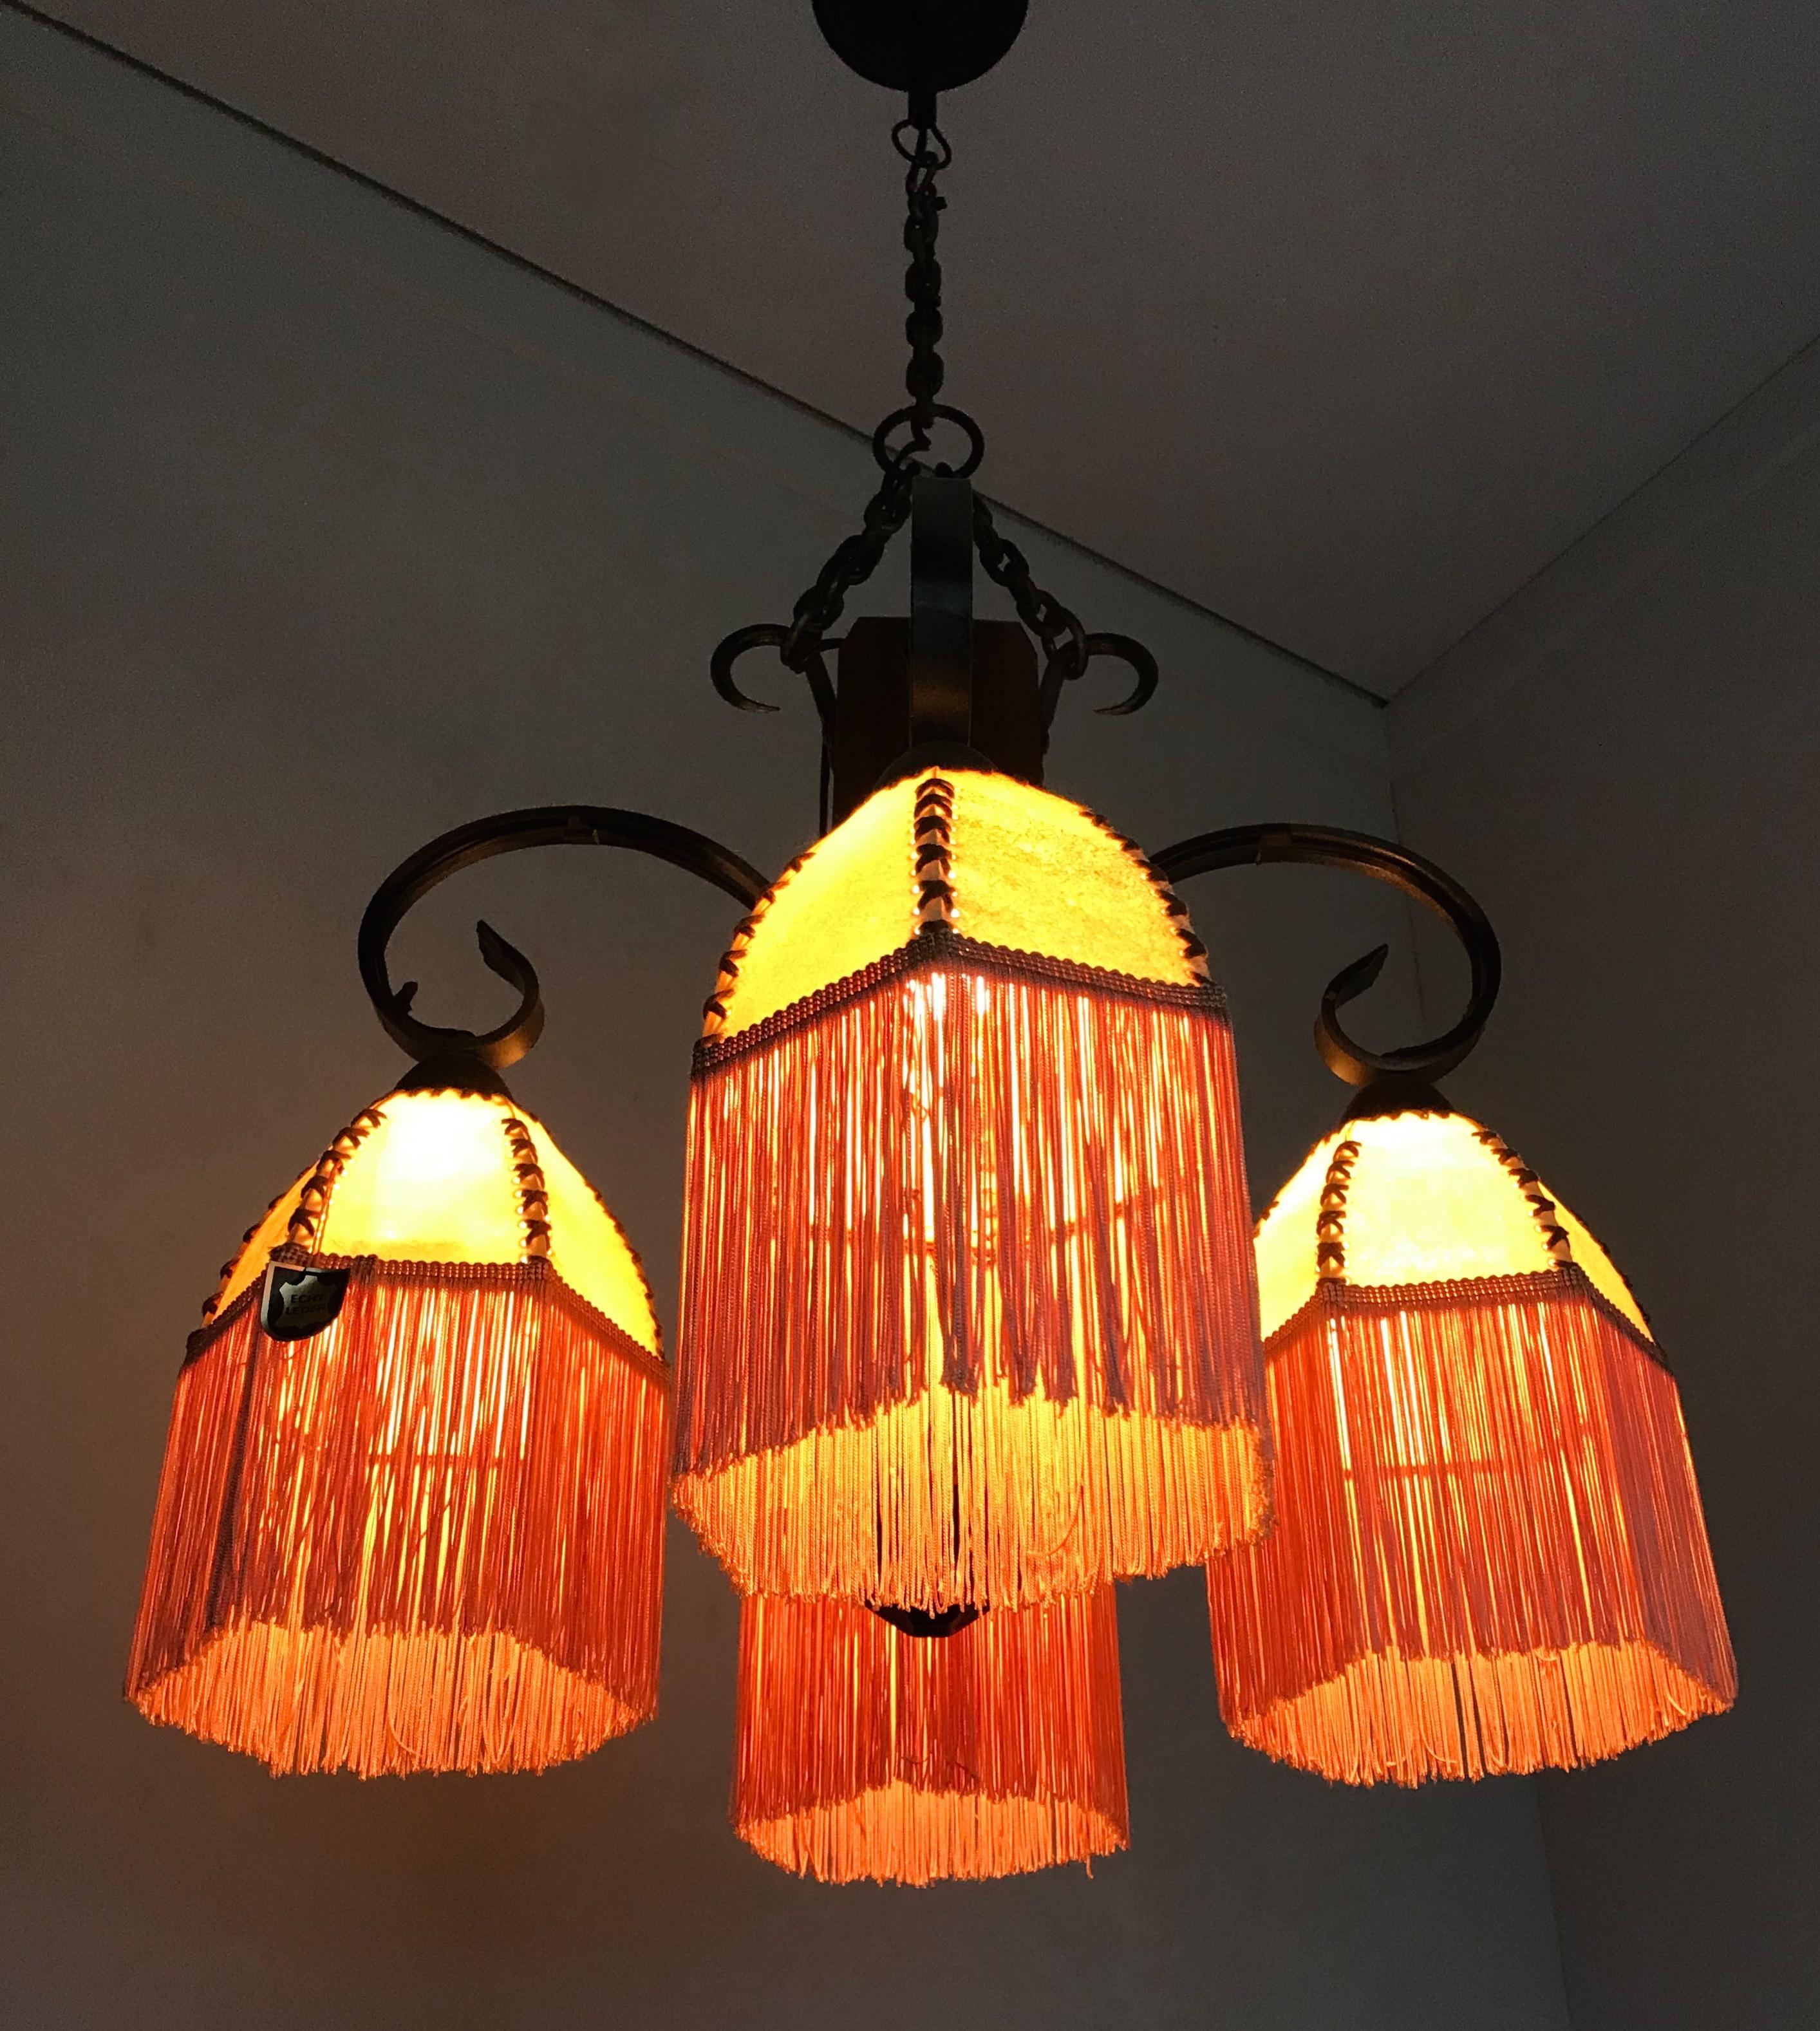 Hand-Crafted Rare Wrought Iron and Wood Pendant Light Fixture with Leather Shades and Fringes For Sale